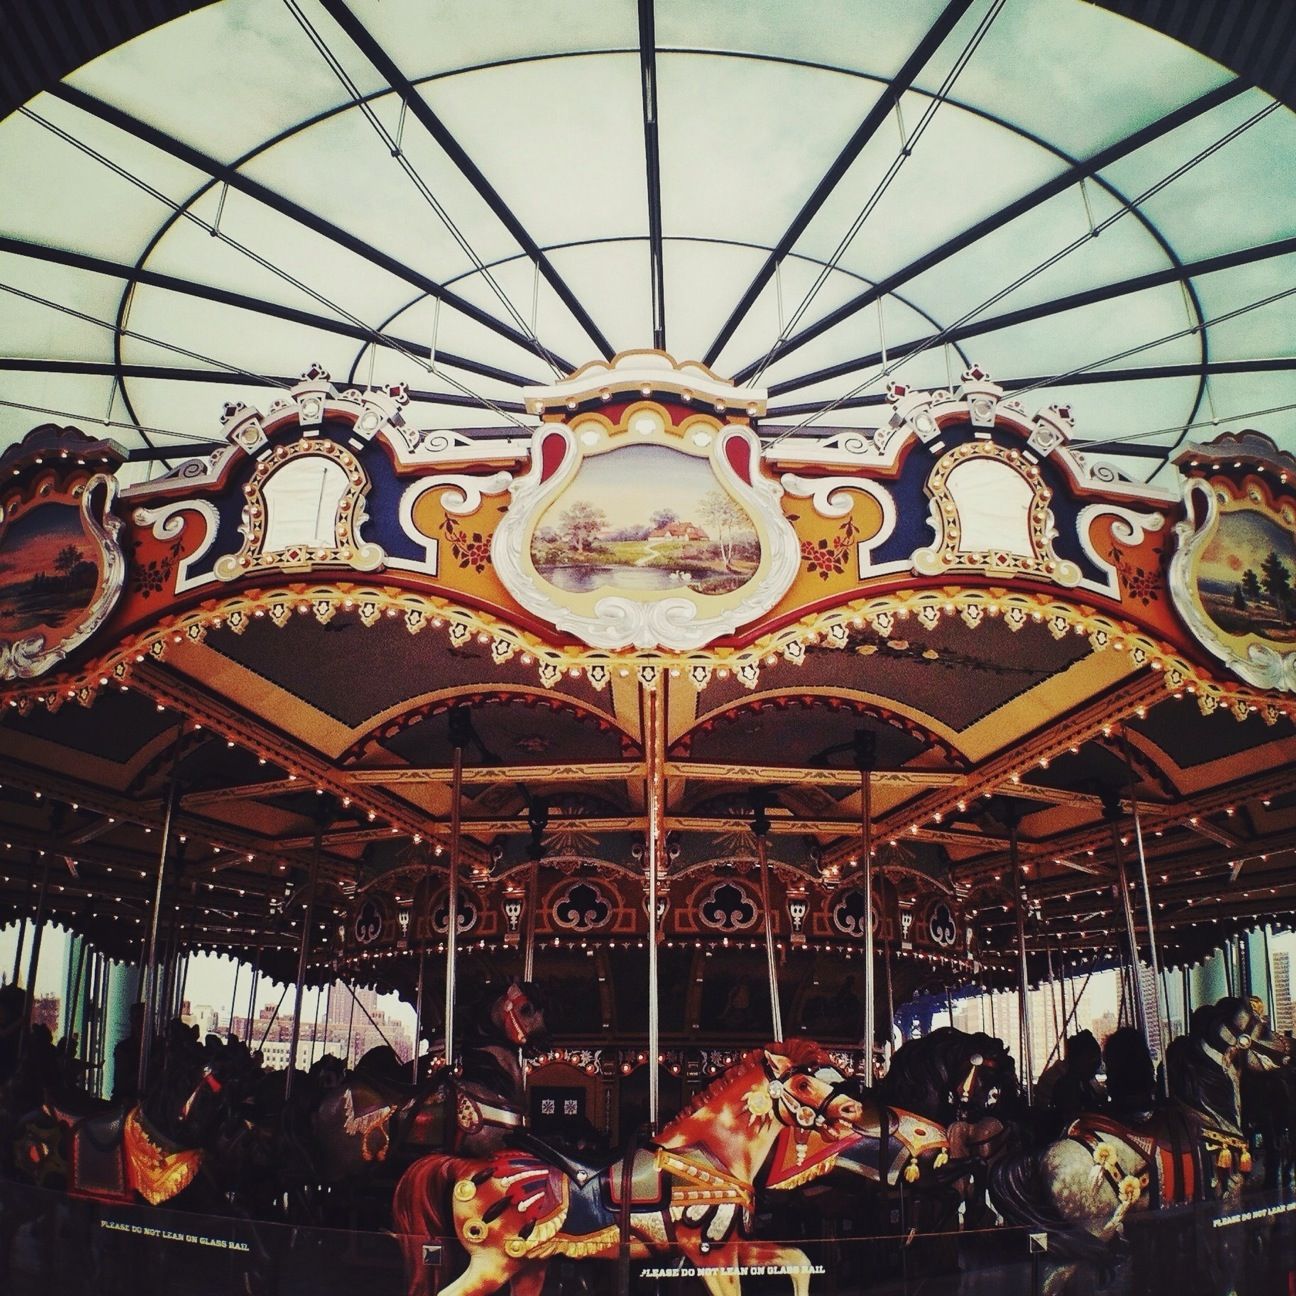 indoors, low angle view, ceiling, amusement park, decoration, art and craft, amusement park ride, art, arts culture and entertainment, creativity, hanging, illuminated, ornate, multi colored, design, carousel, animal representation, cultures, lighting equipment, built structure